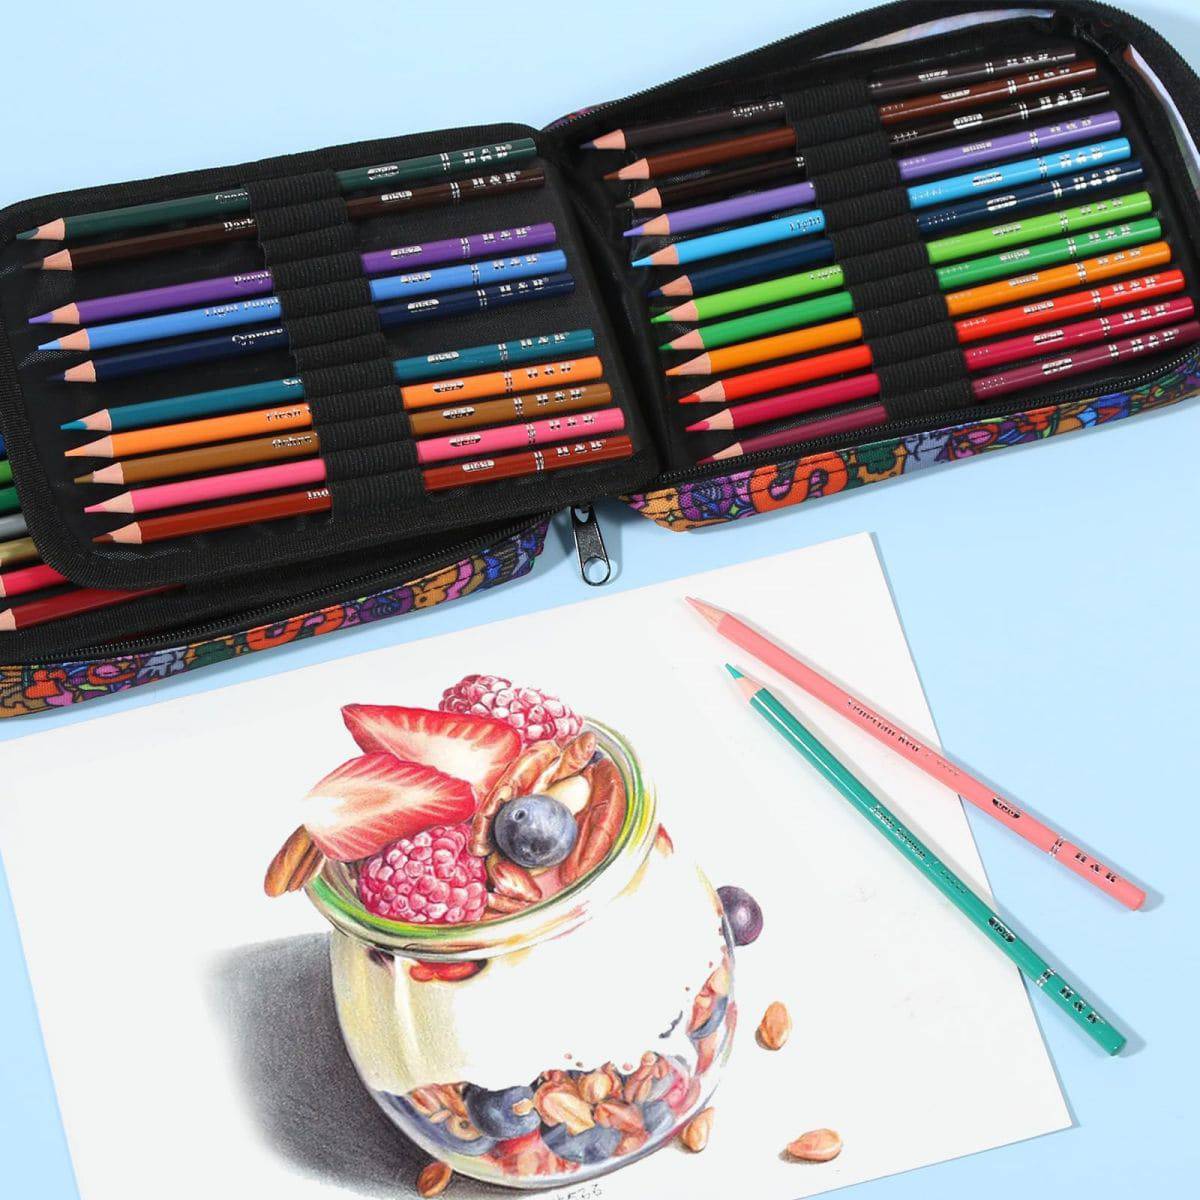 COOLBABY Colouring Pencils for Adults Coloured Pencils Set Artist Sketching Oil Based Colored Pencils Drawing Art Kit Supplies Professional Set Pack of 120 - COOL BABY